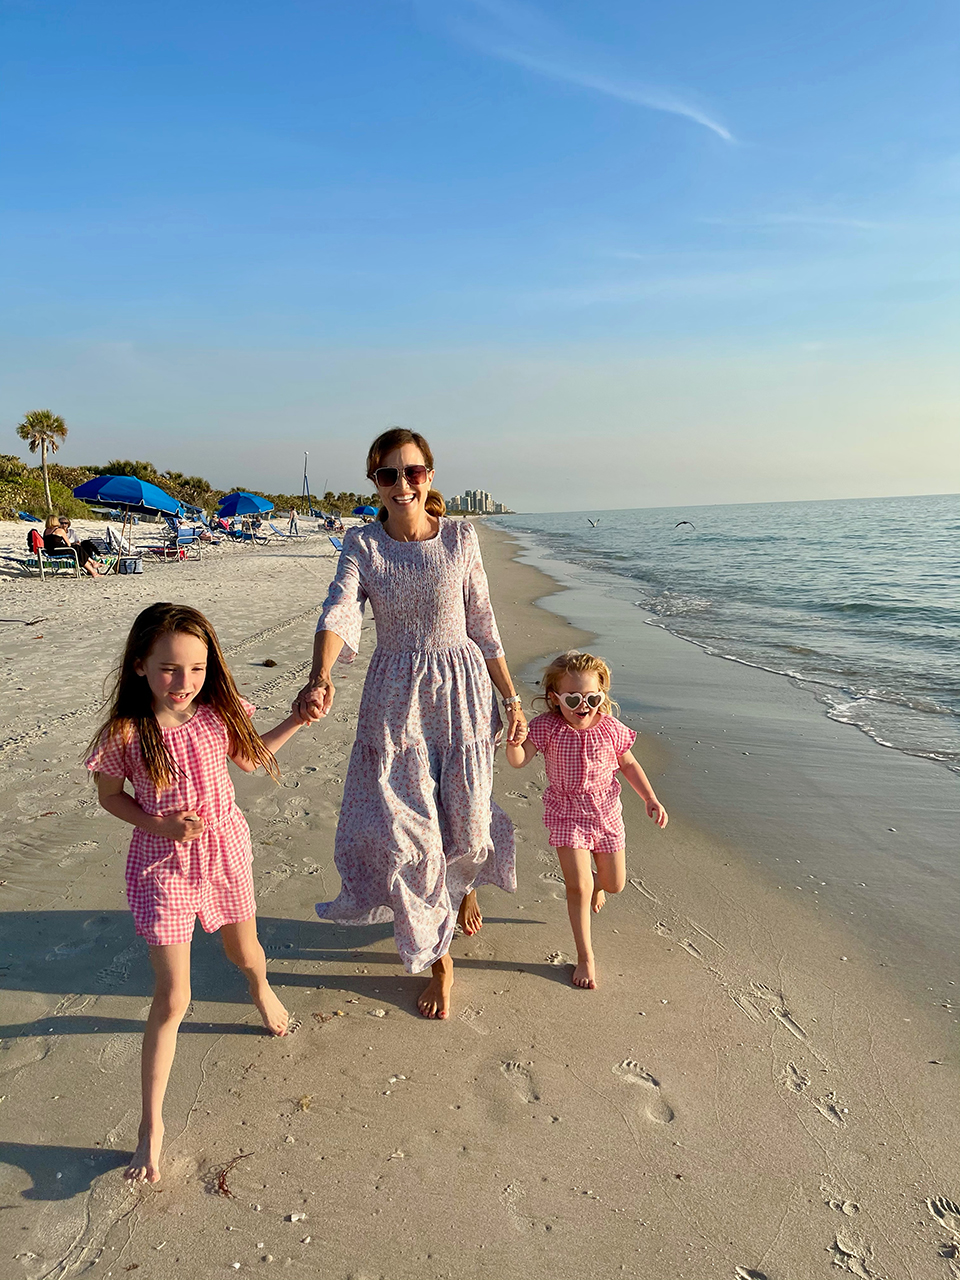 Nancy Weiss walking on the beach with her daughters